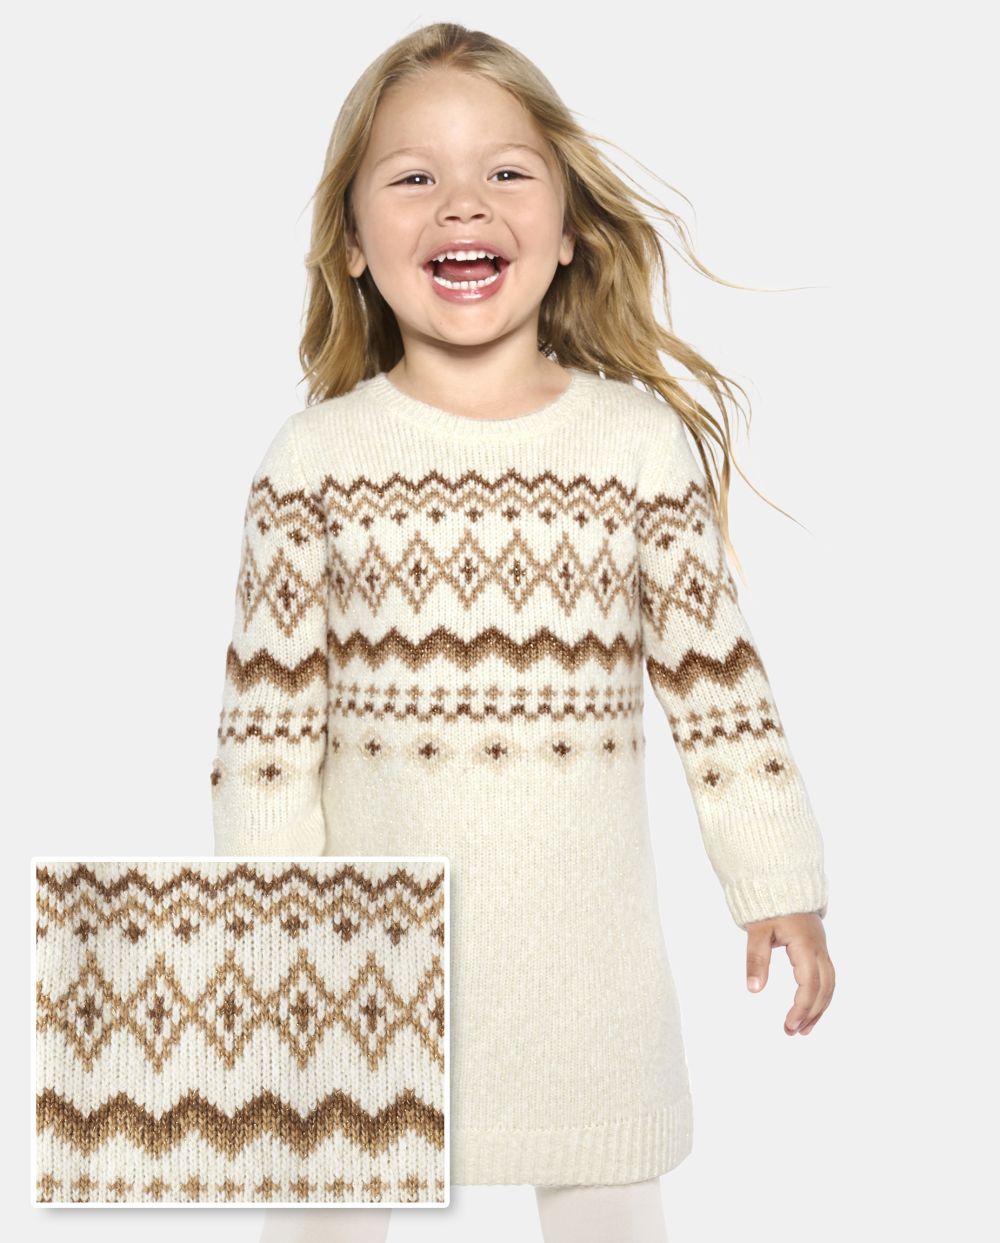 Tall Toddler Baby Long Sleeves Crew Neck Above the Knee Sweater Dress